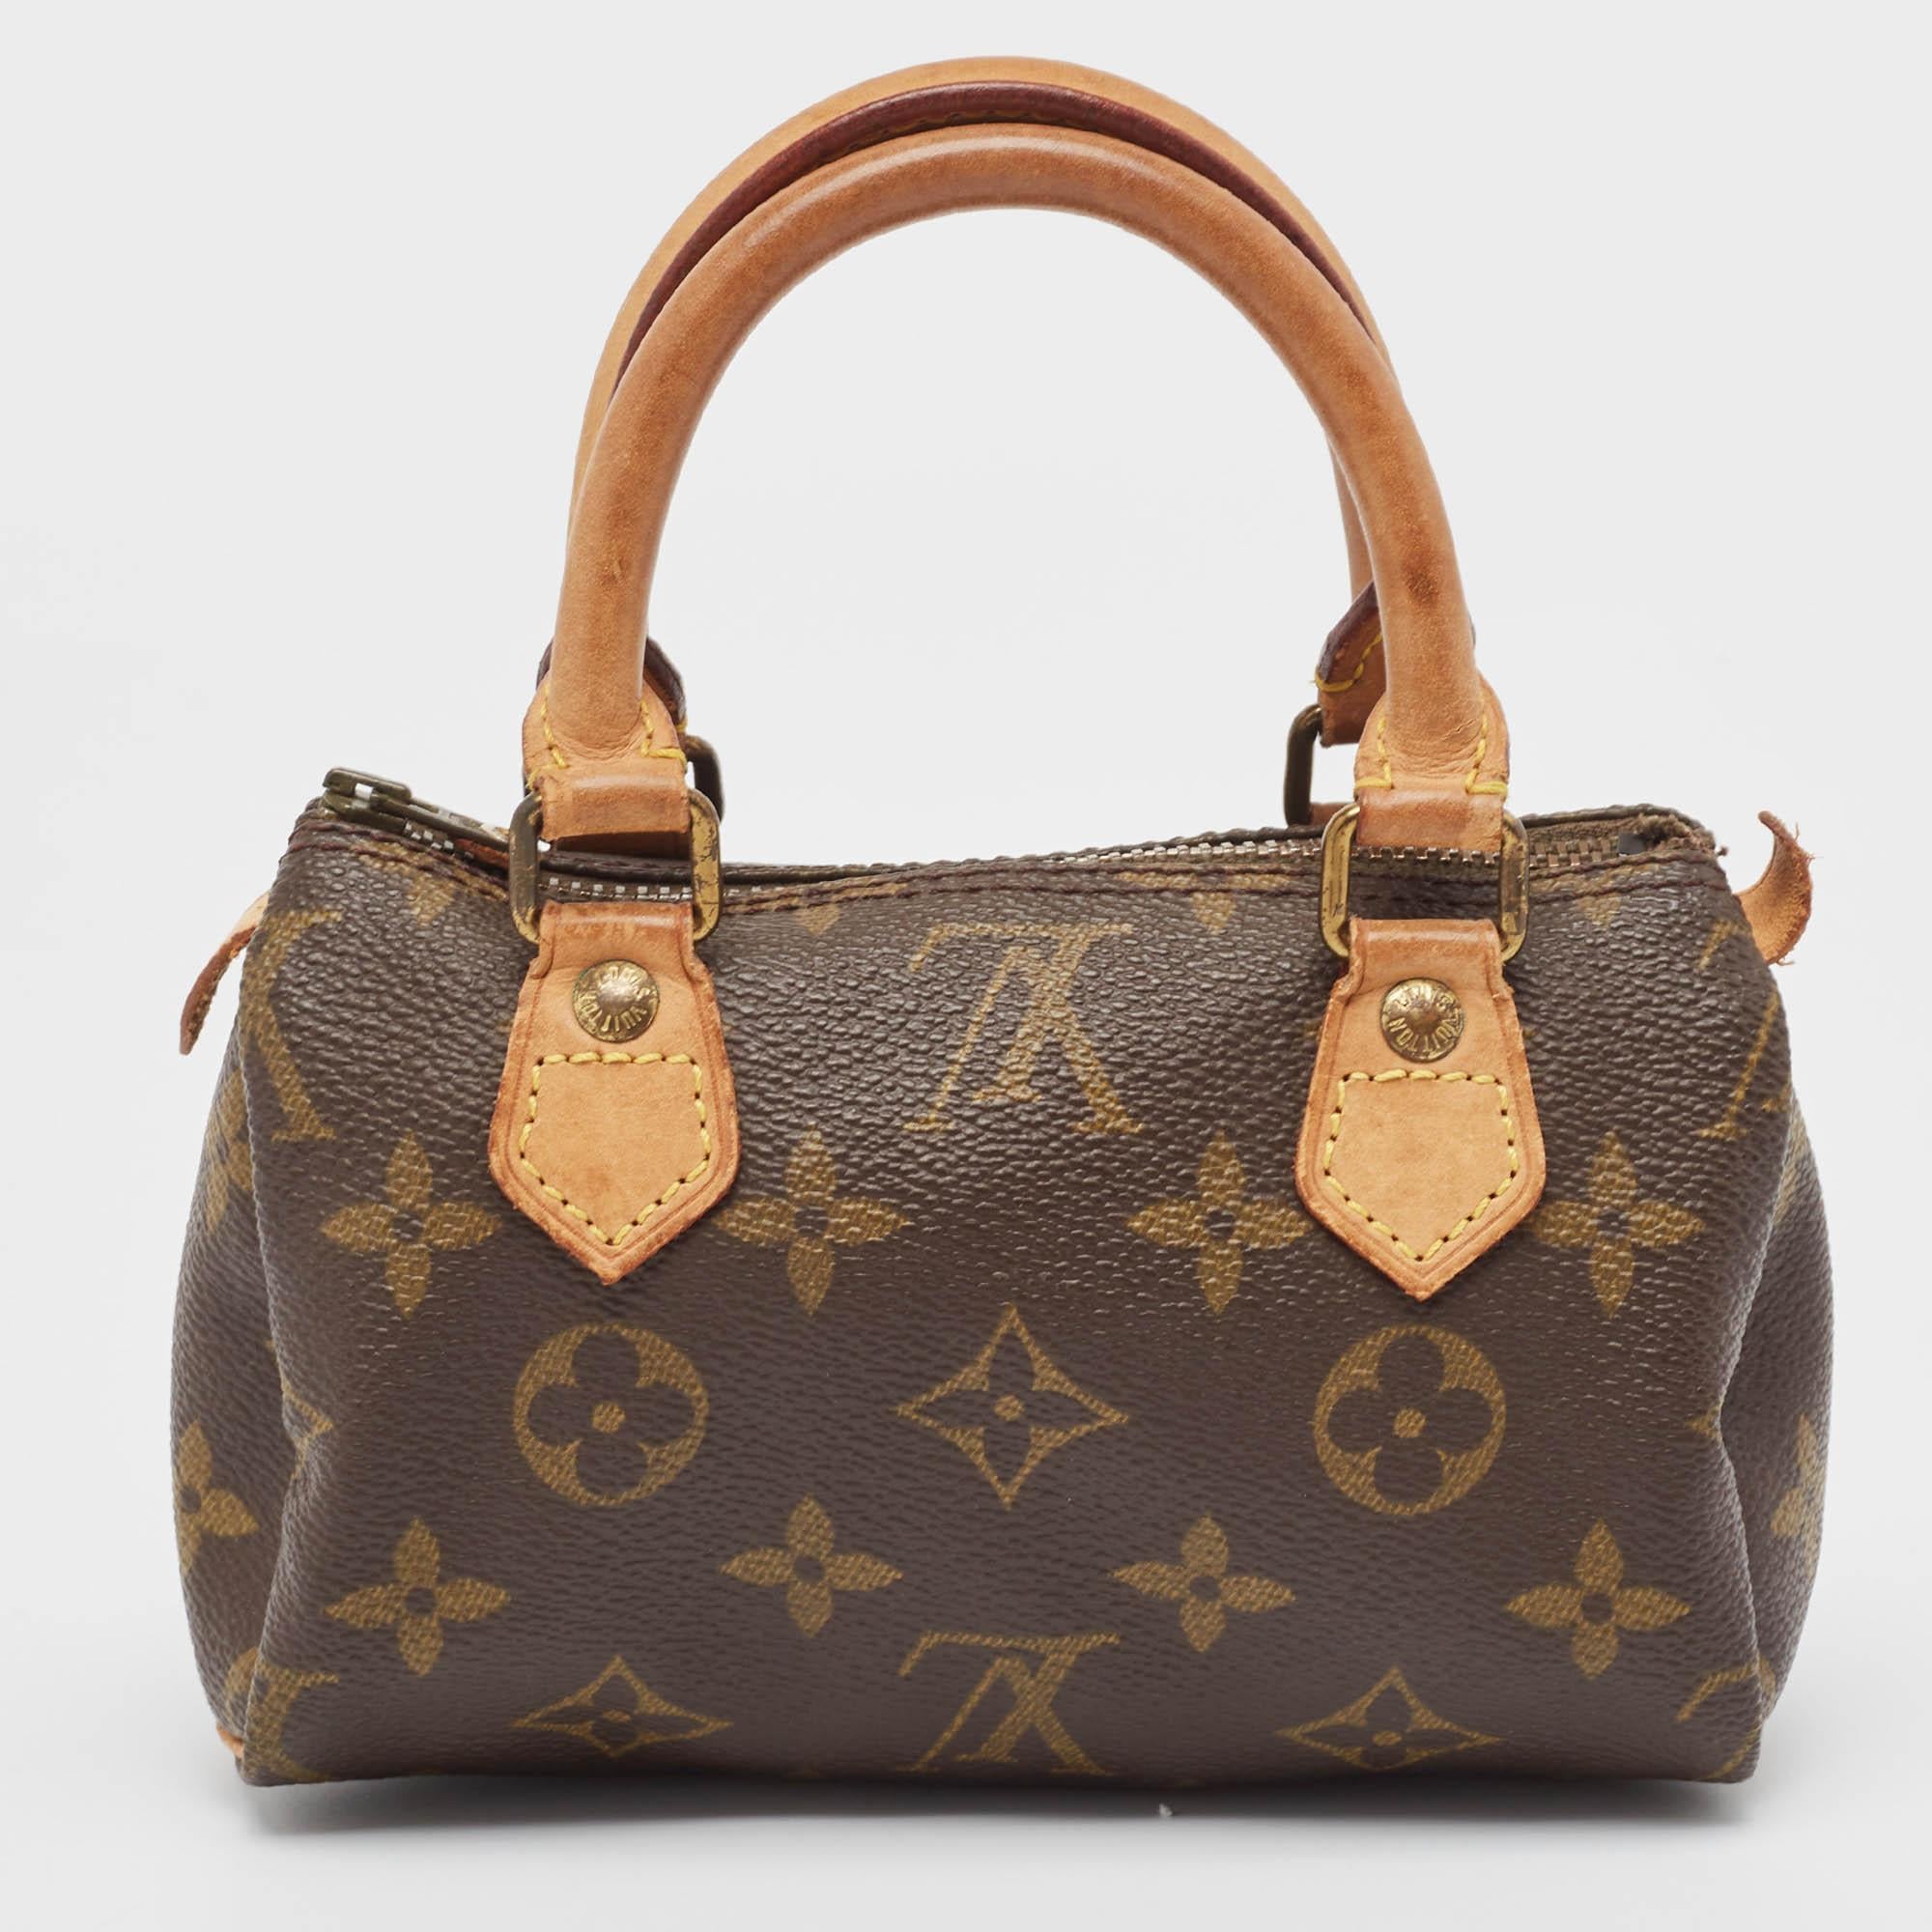 This Louis Vuitton Speedy may be tiny but it delivers an unmissable style statement. It is made of Monogram canvas and held by leather handles.

Includes: Brand Dustbag